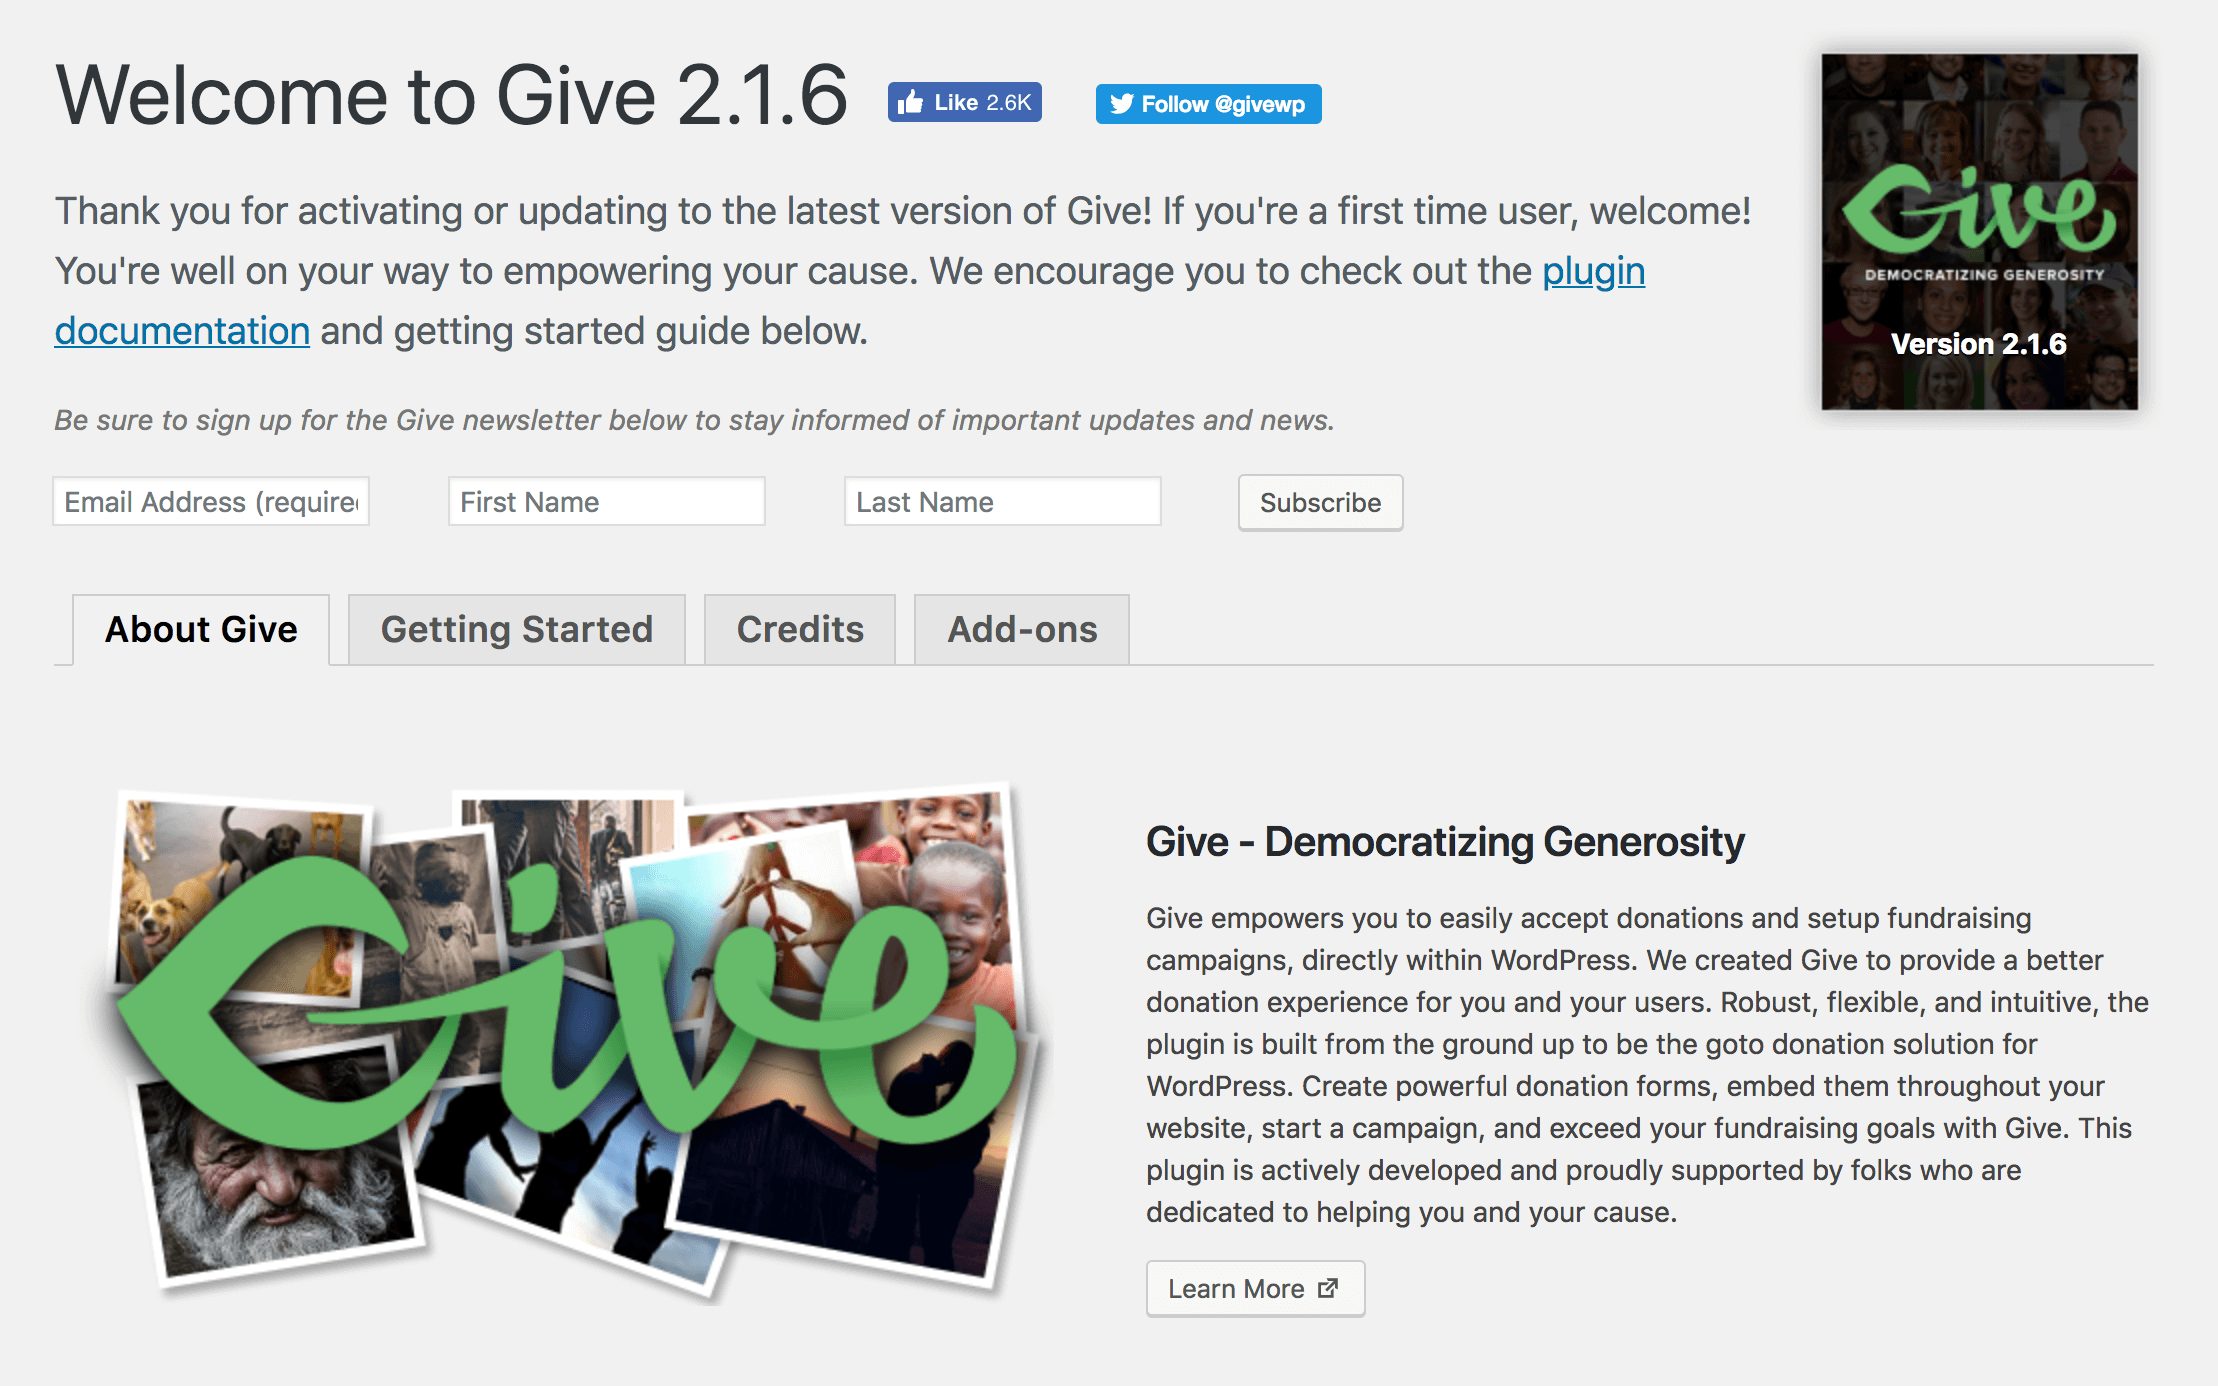 The welcome screen for Give.